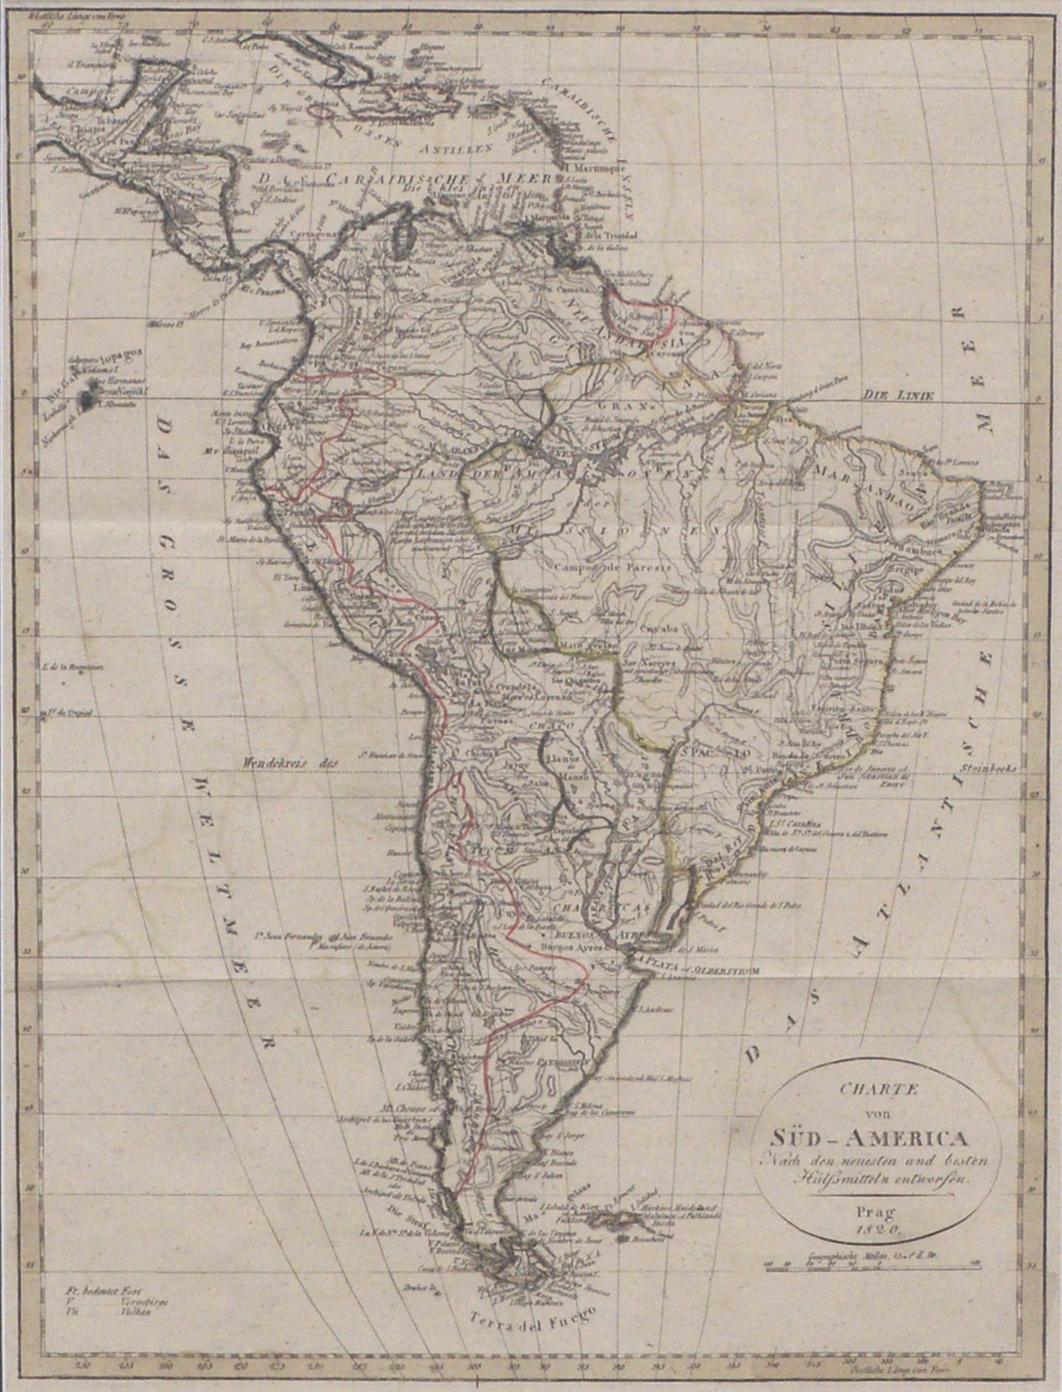 Charte von Sud-America (Map of South America) - Etching with Hand-Drawn Outlines - Print by Franz Pluth